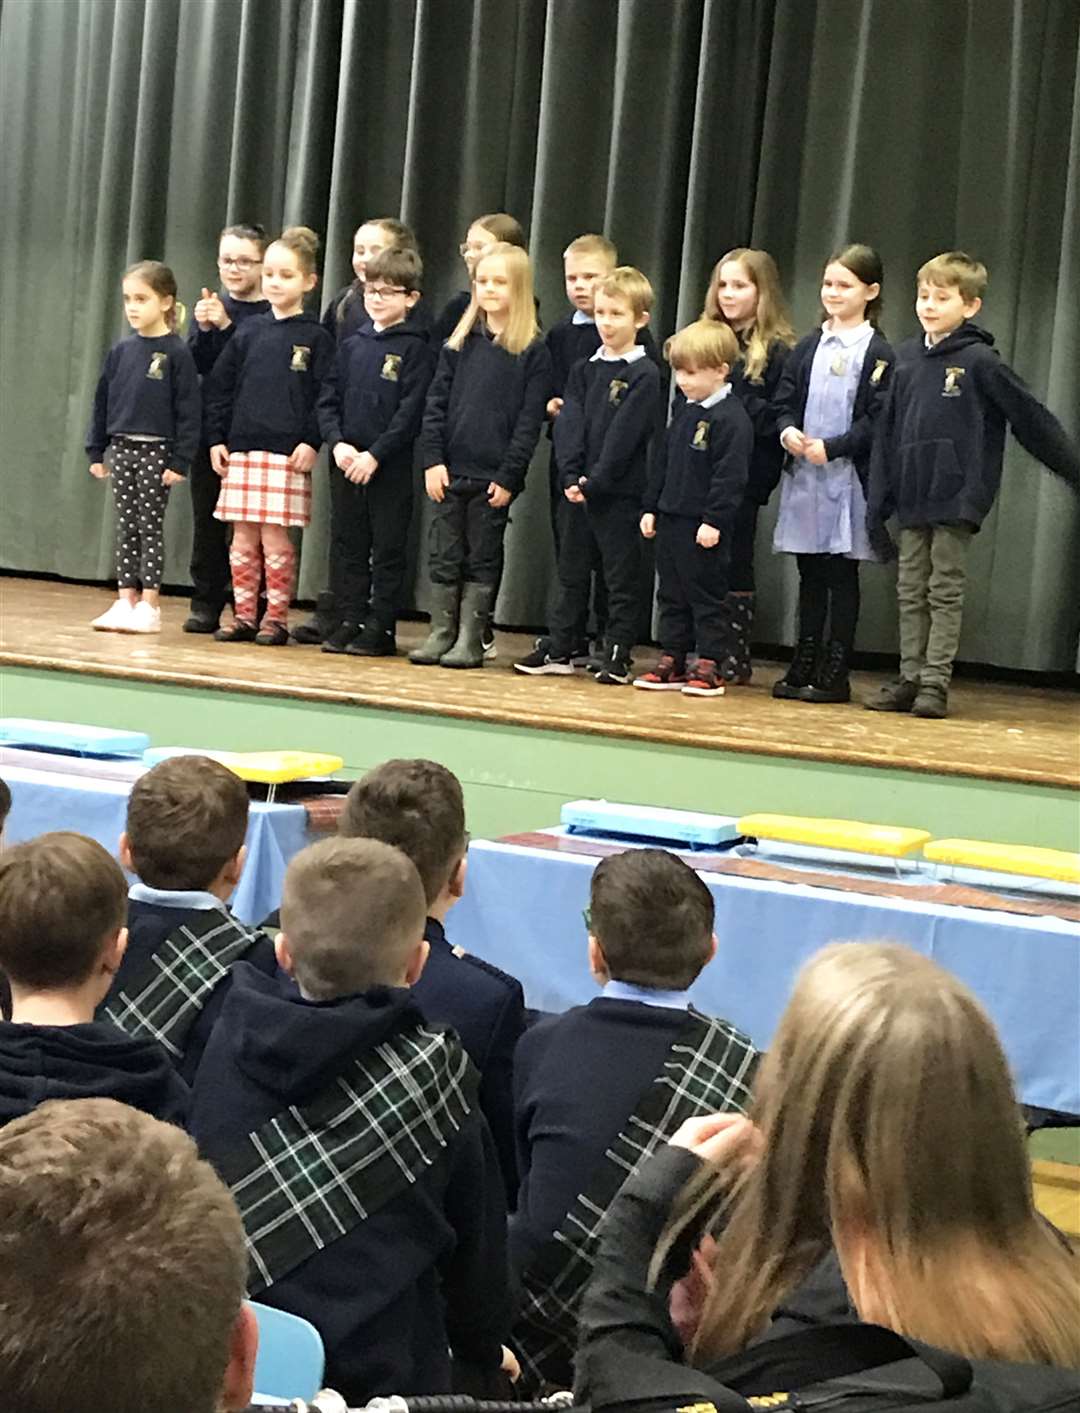 Some of the Watten Prmary School and Early Learning Centre children performing at their traditional Scottish concert.